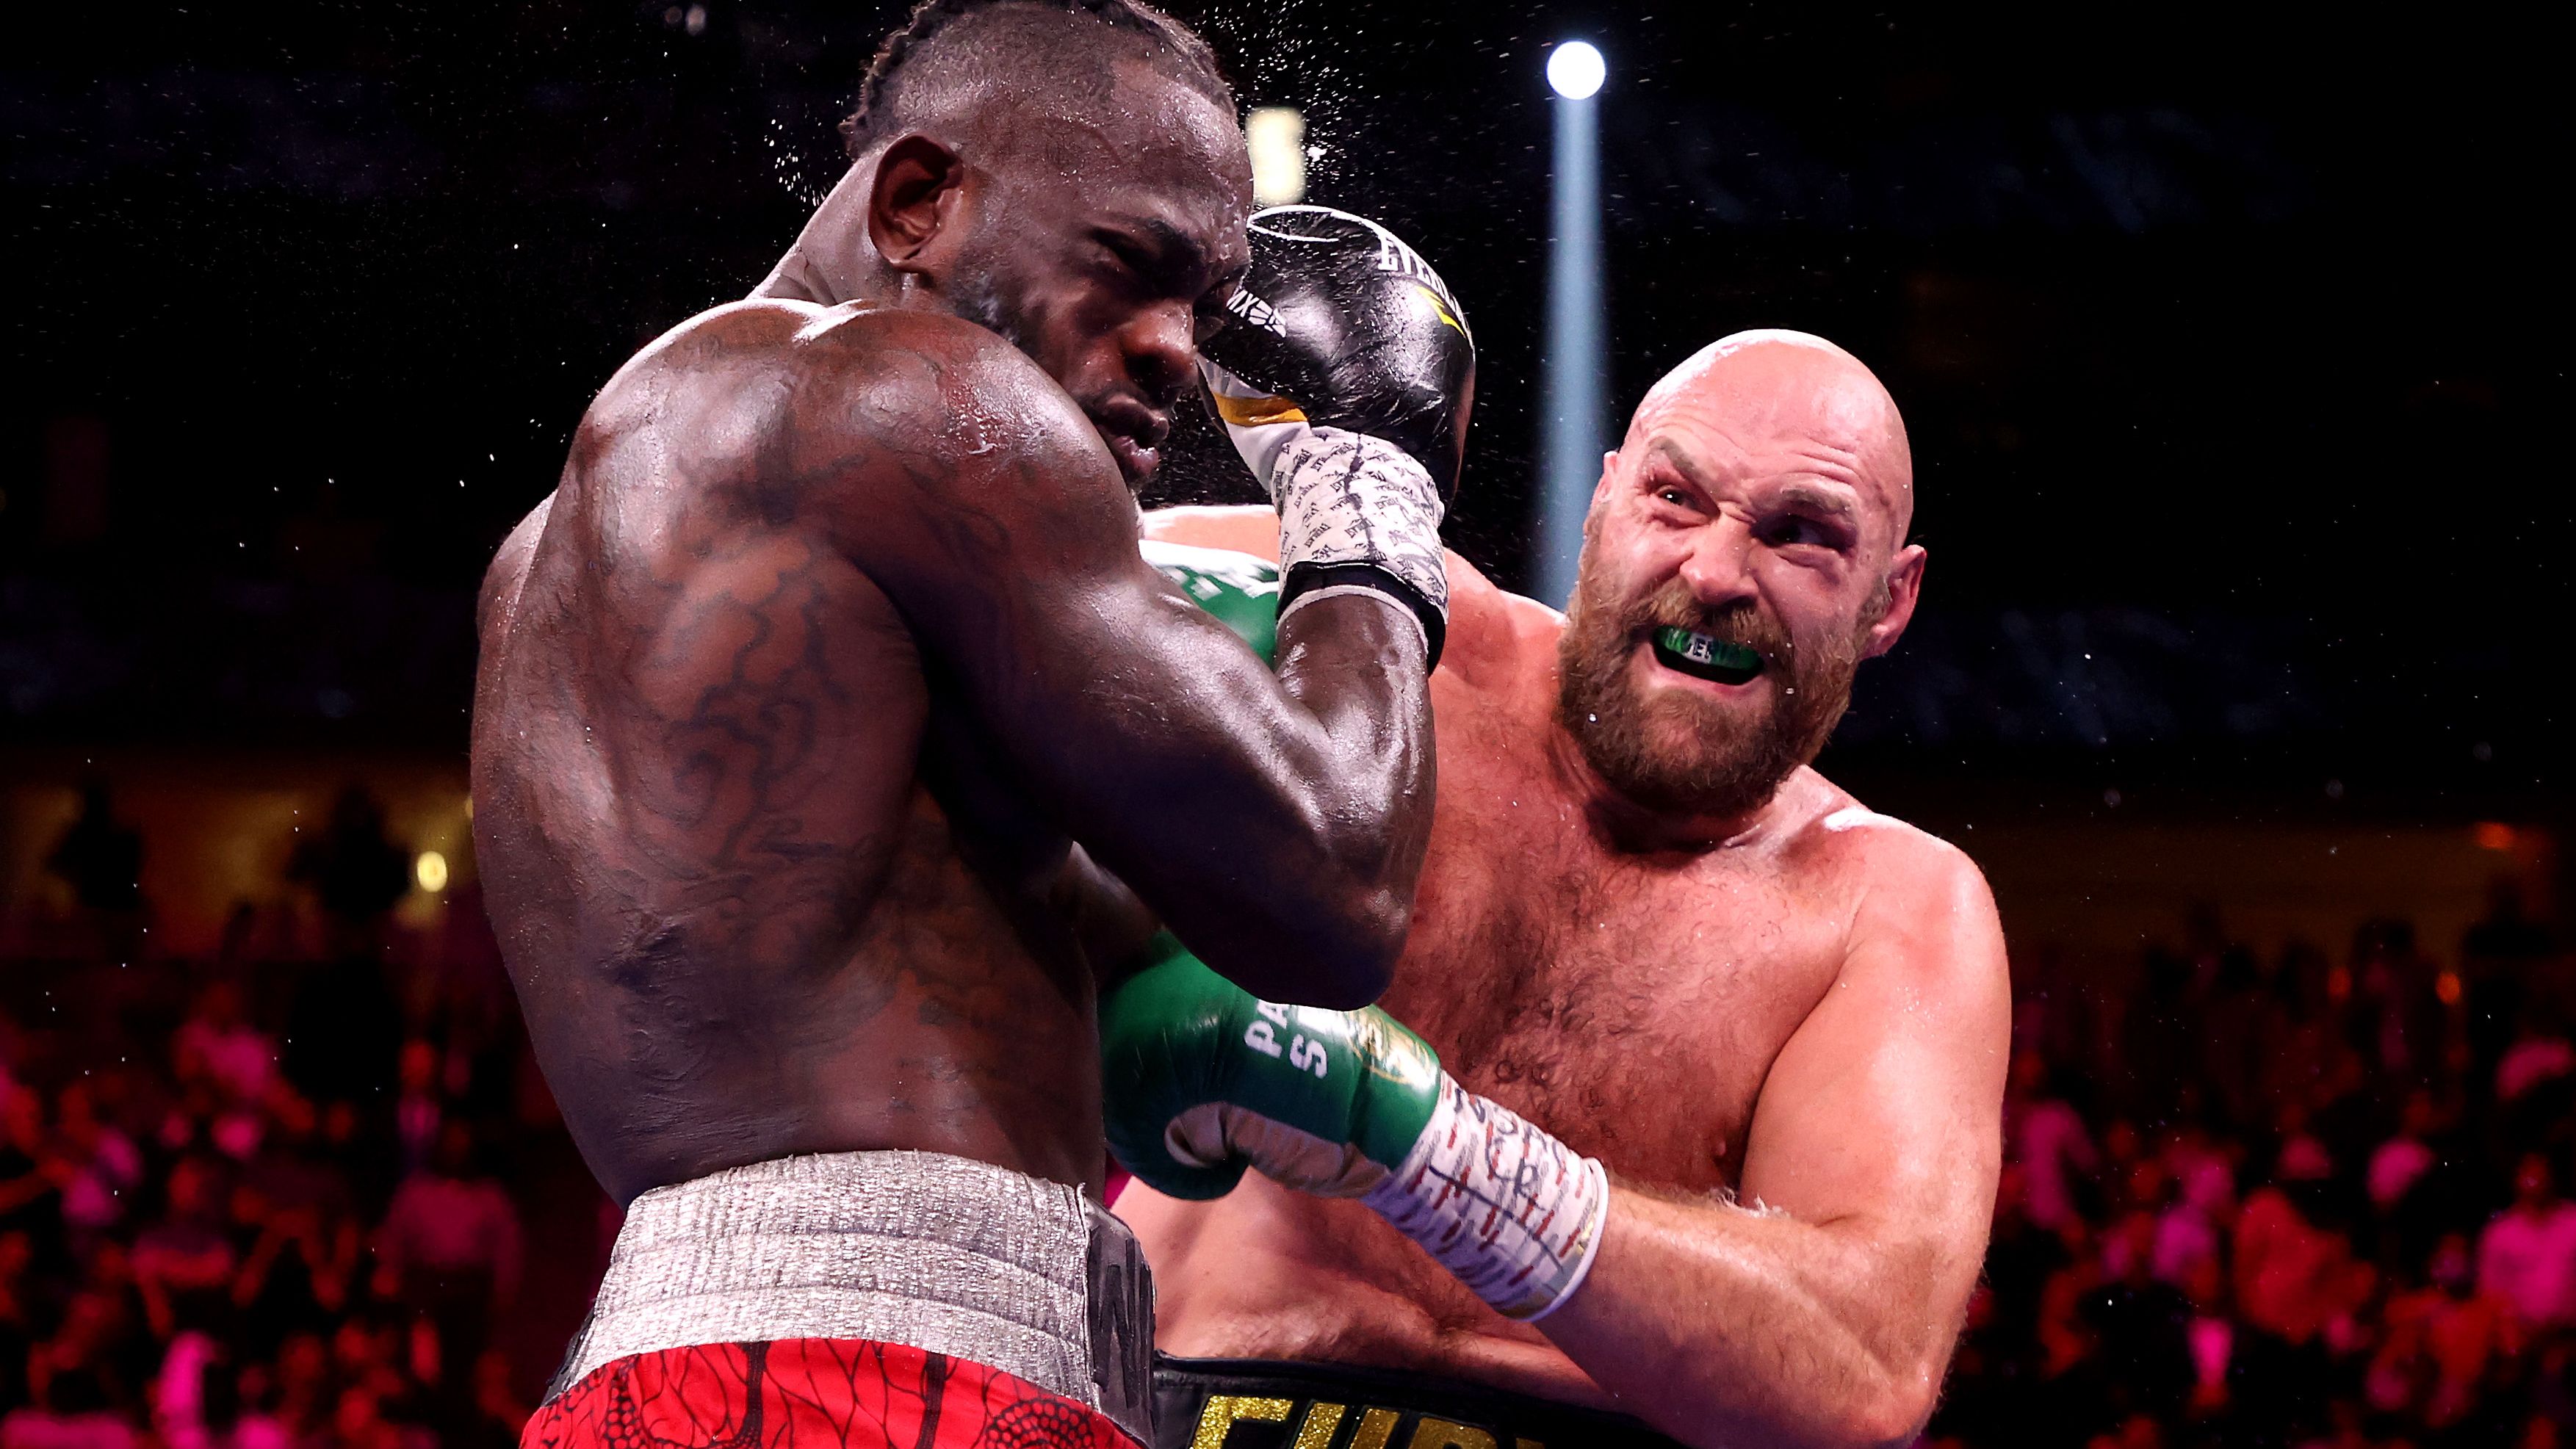 "We fought like two warriors in there," said Tyson Fury of Saturday's fight after knocking out Deontay Wilder.